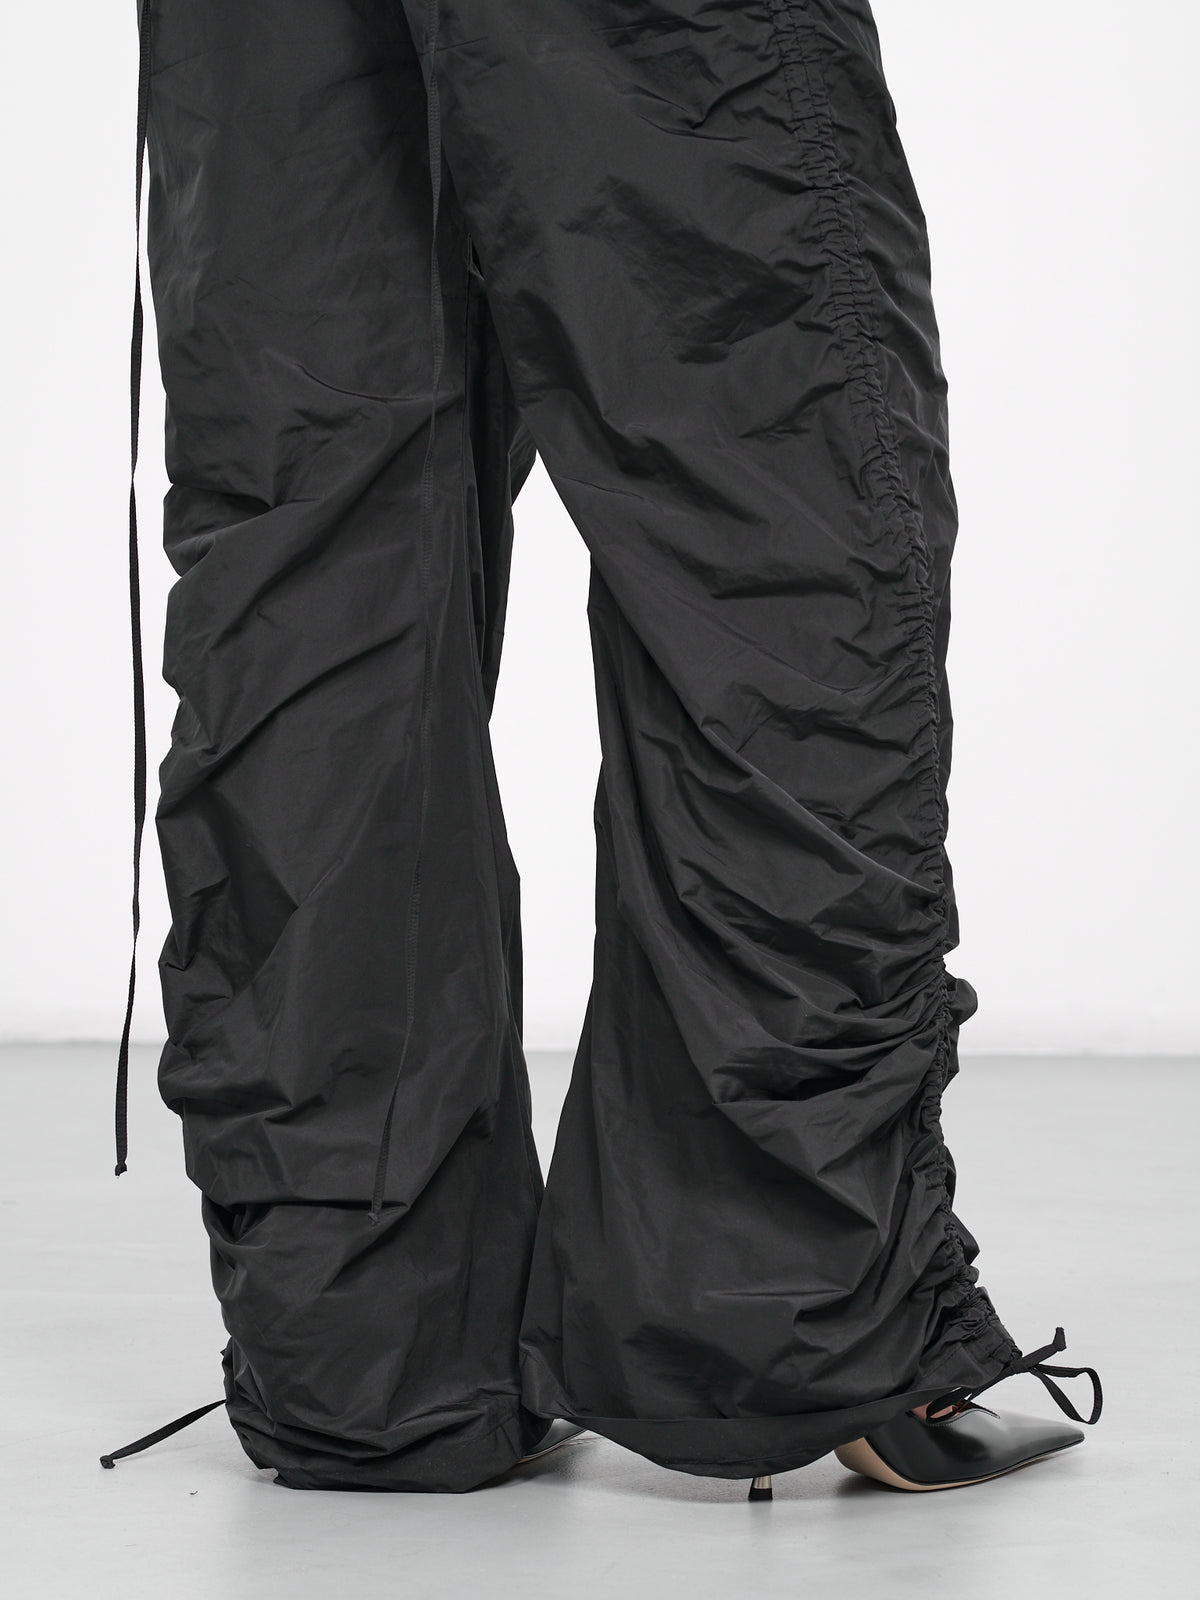 Gathered Trousers (TRO02BL-BLACK)